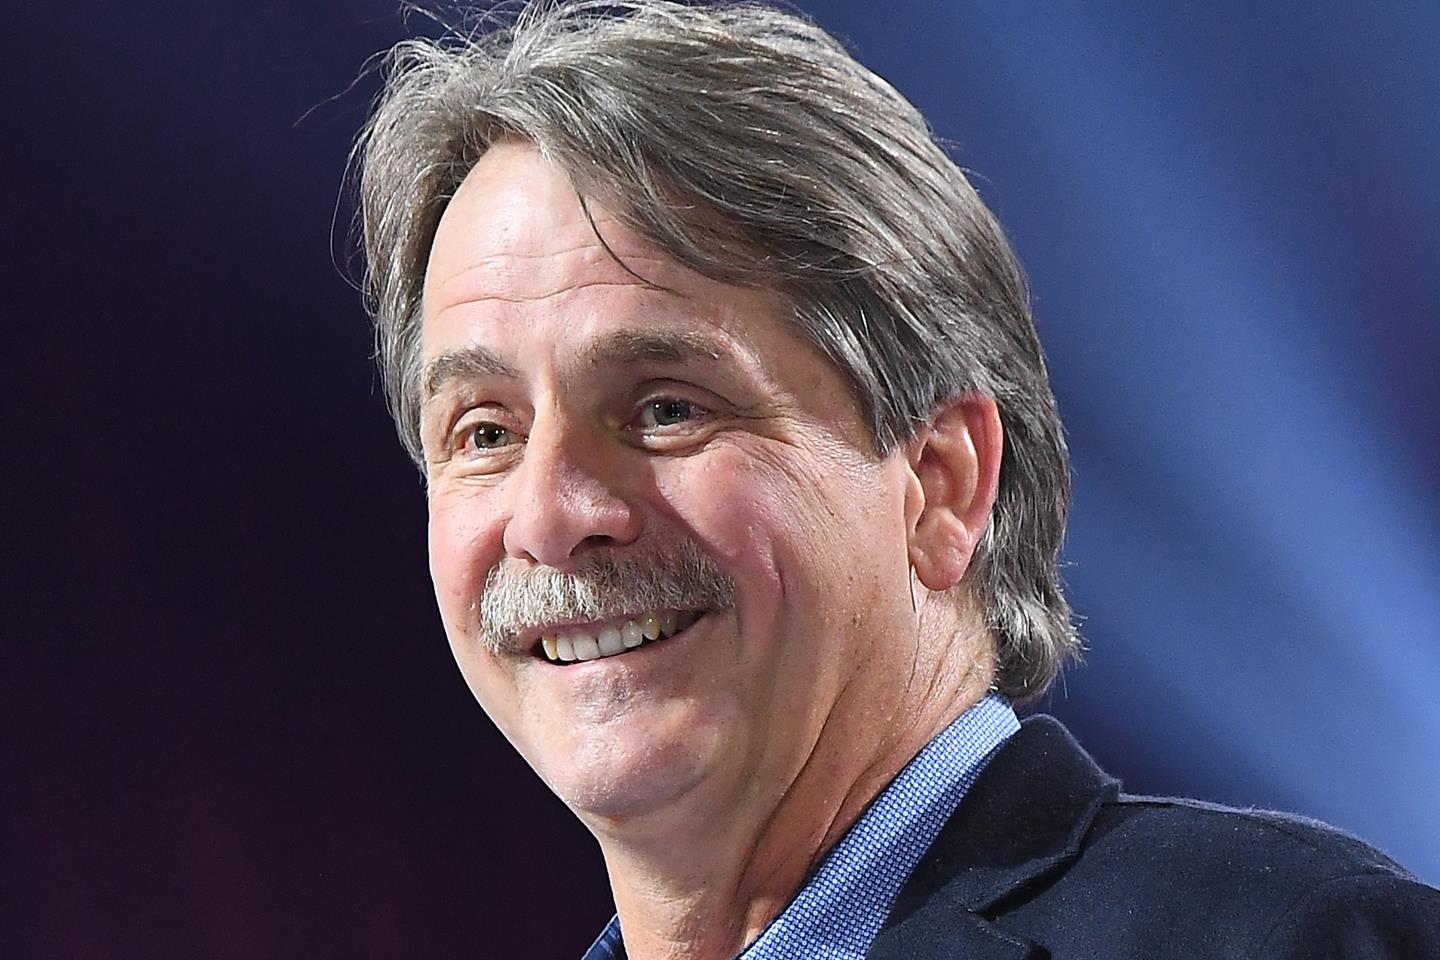 Jeff Foxworthy Tickets Buy and sell Jeff Foxworthy Tickets